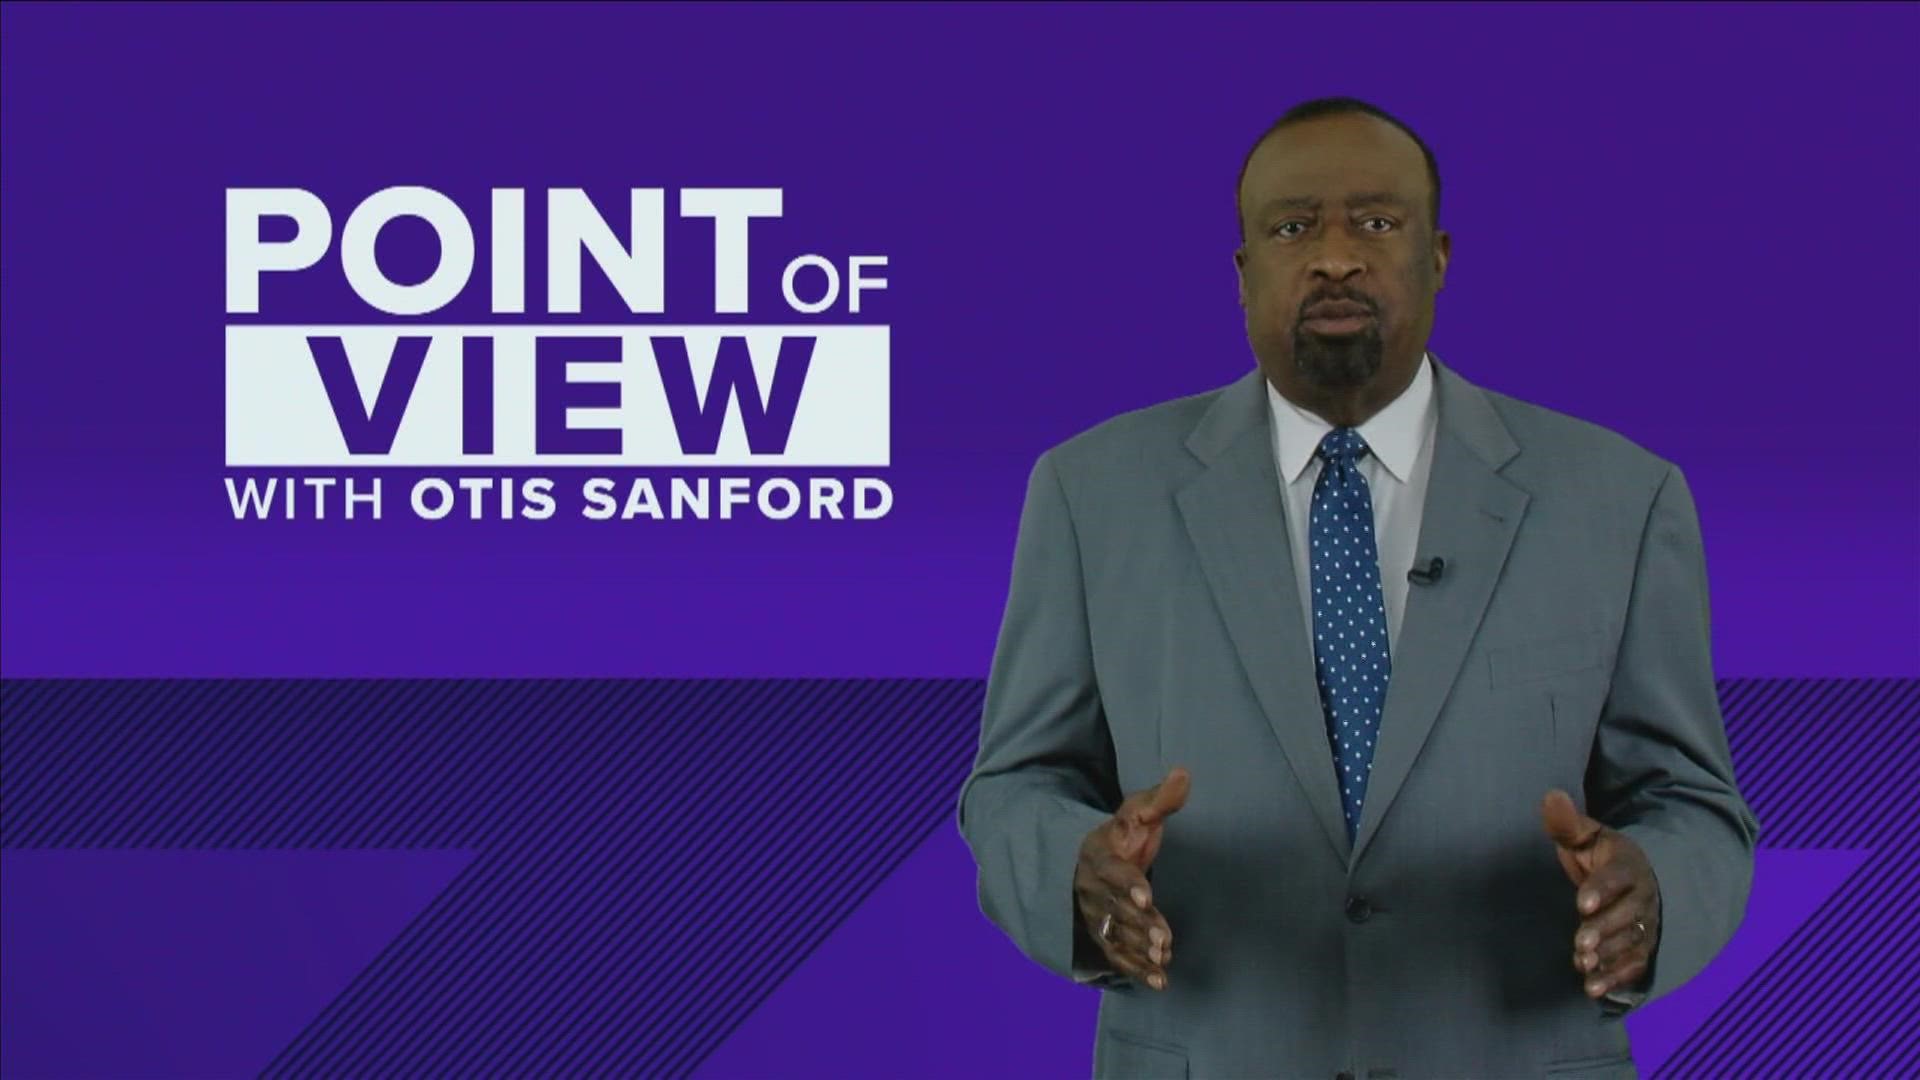 ABC24 political analyst and commentator Otis Sanford shared his point of view on the justice system failures in recent Memphis violence.